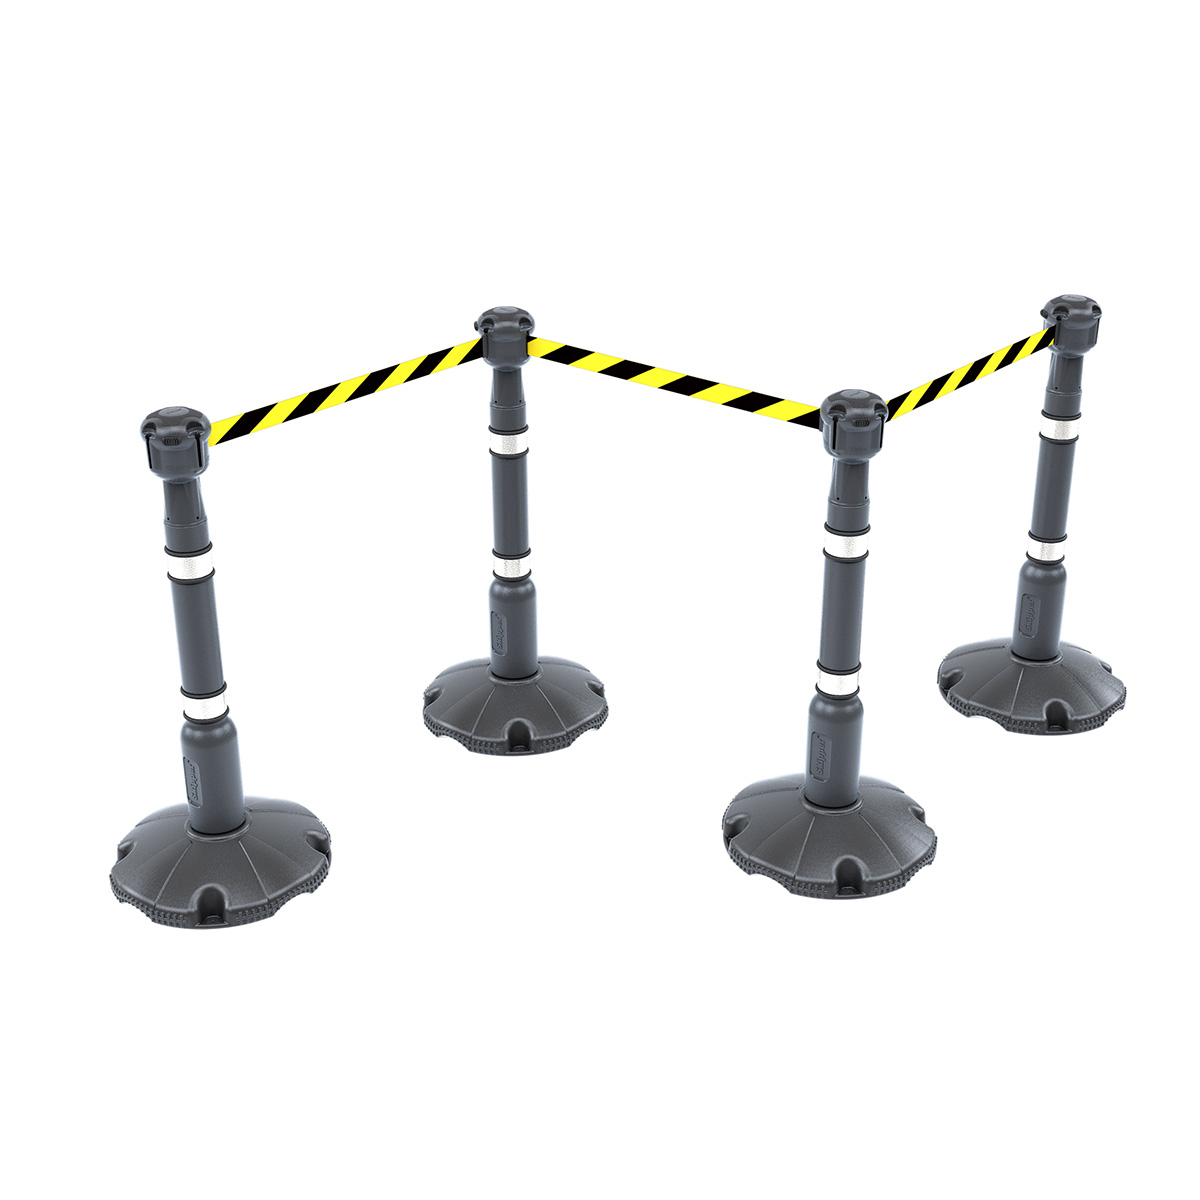 Skipper™ Portable Safety Barrier Kit 27m With Silver Posts And Black & Yellow Warning Tape